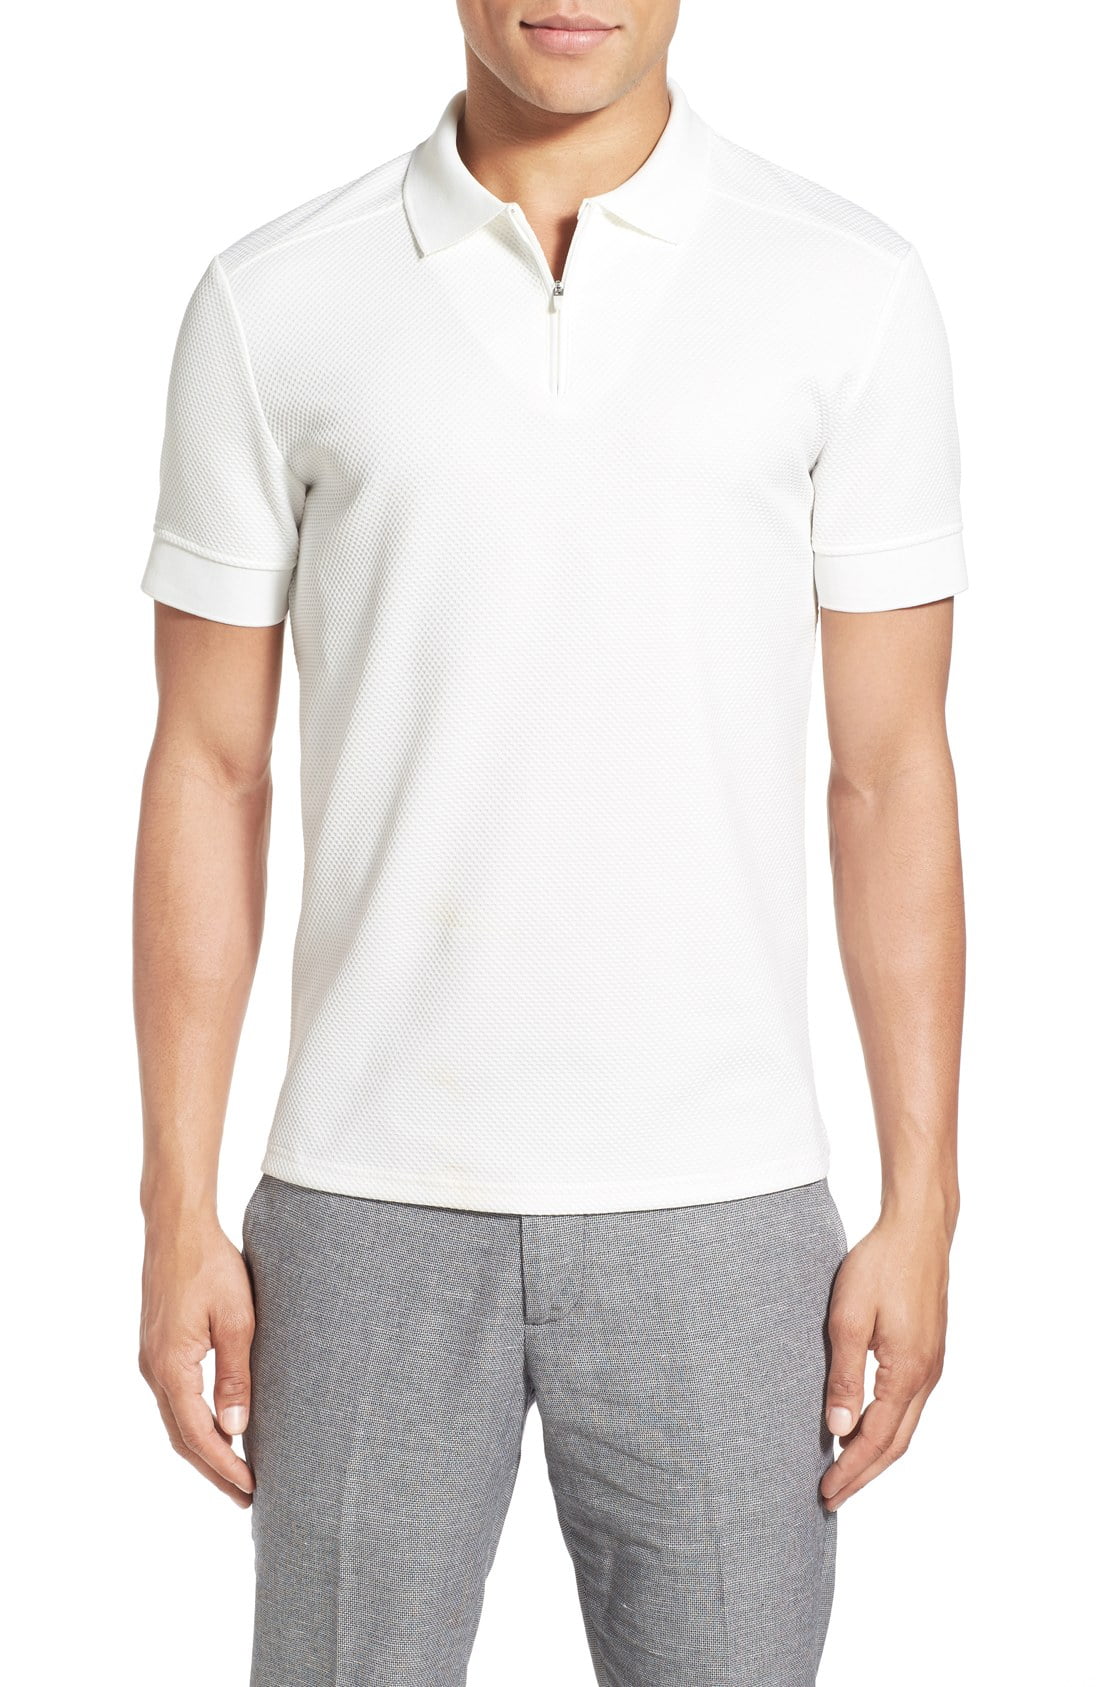 Men’s Vince Camuto Slim Fit Mesh Polo, Size X-Large - White | The ...